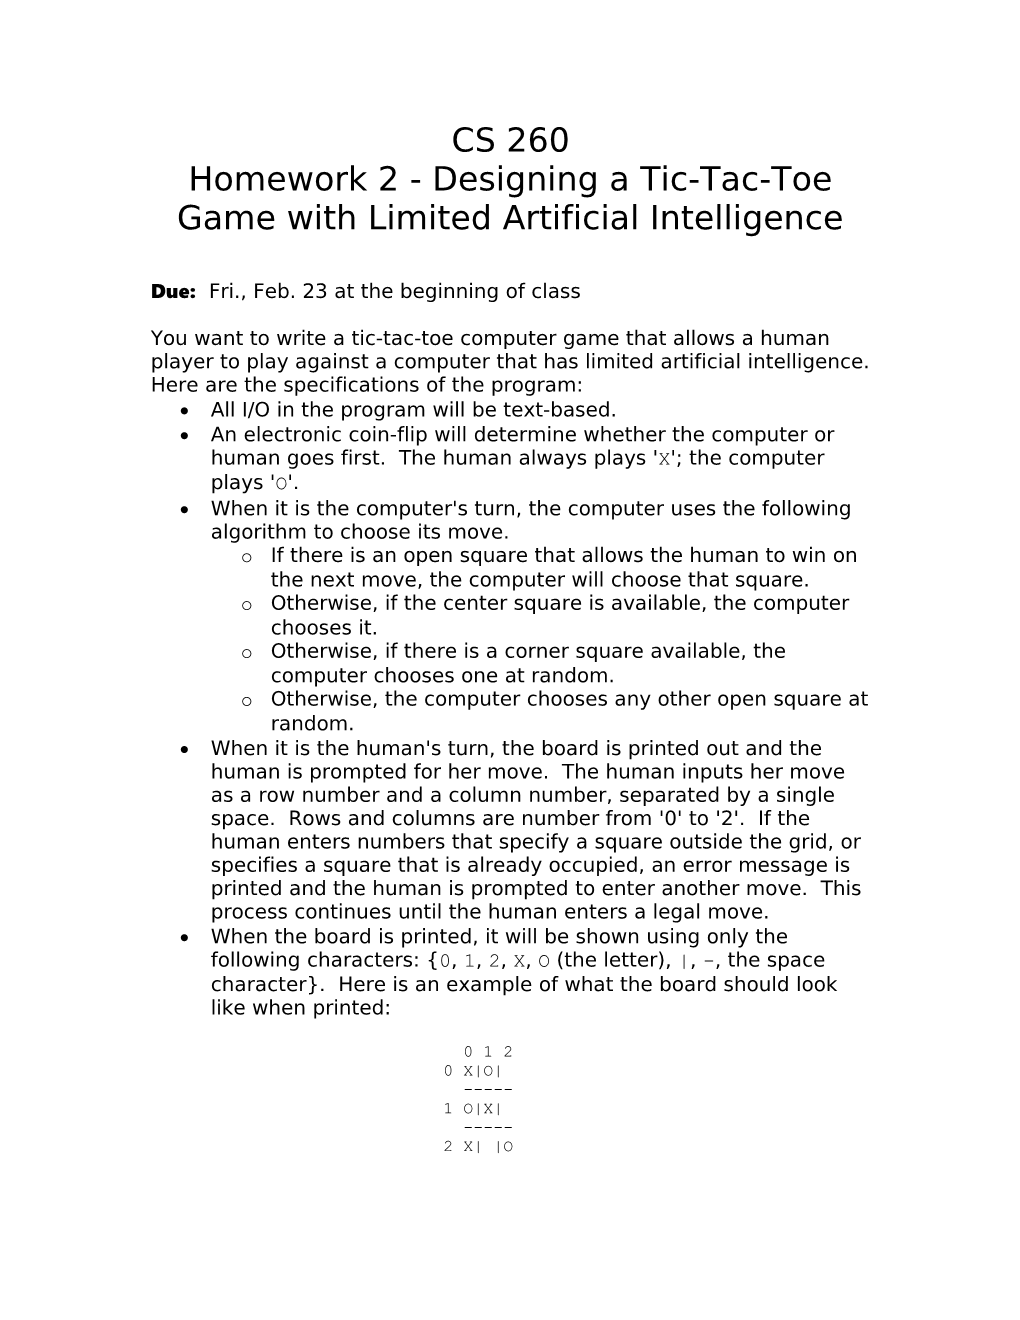 Homework 2 - Designing a Tic-Tac-Toe Game with Limited Artificial Intelligence